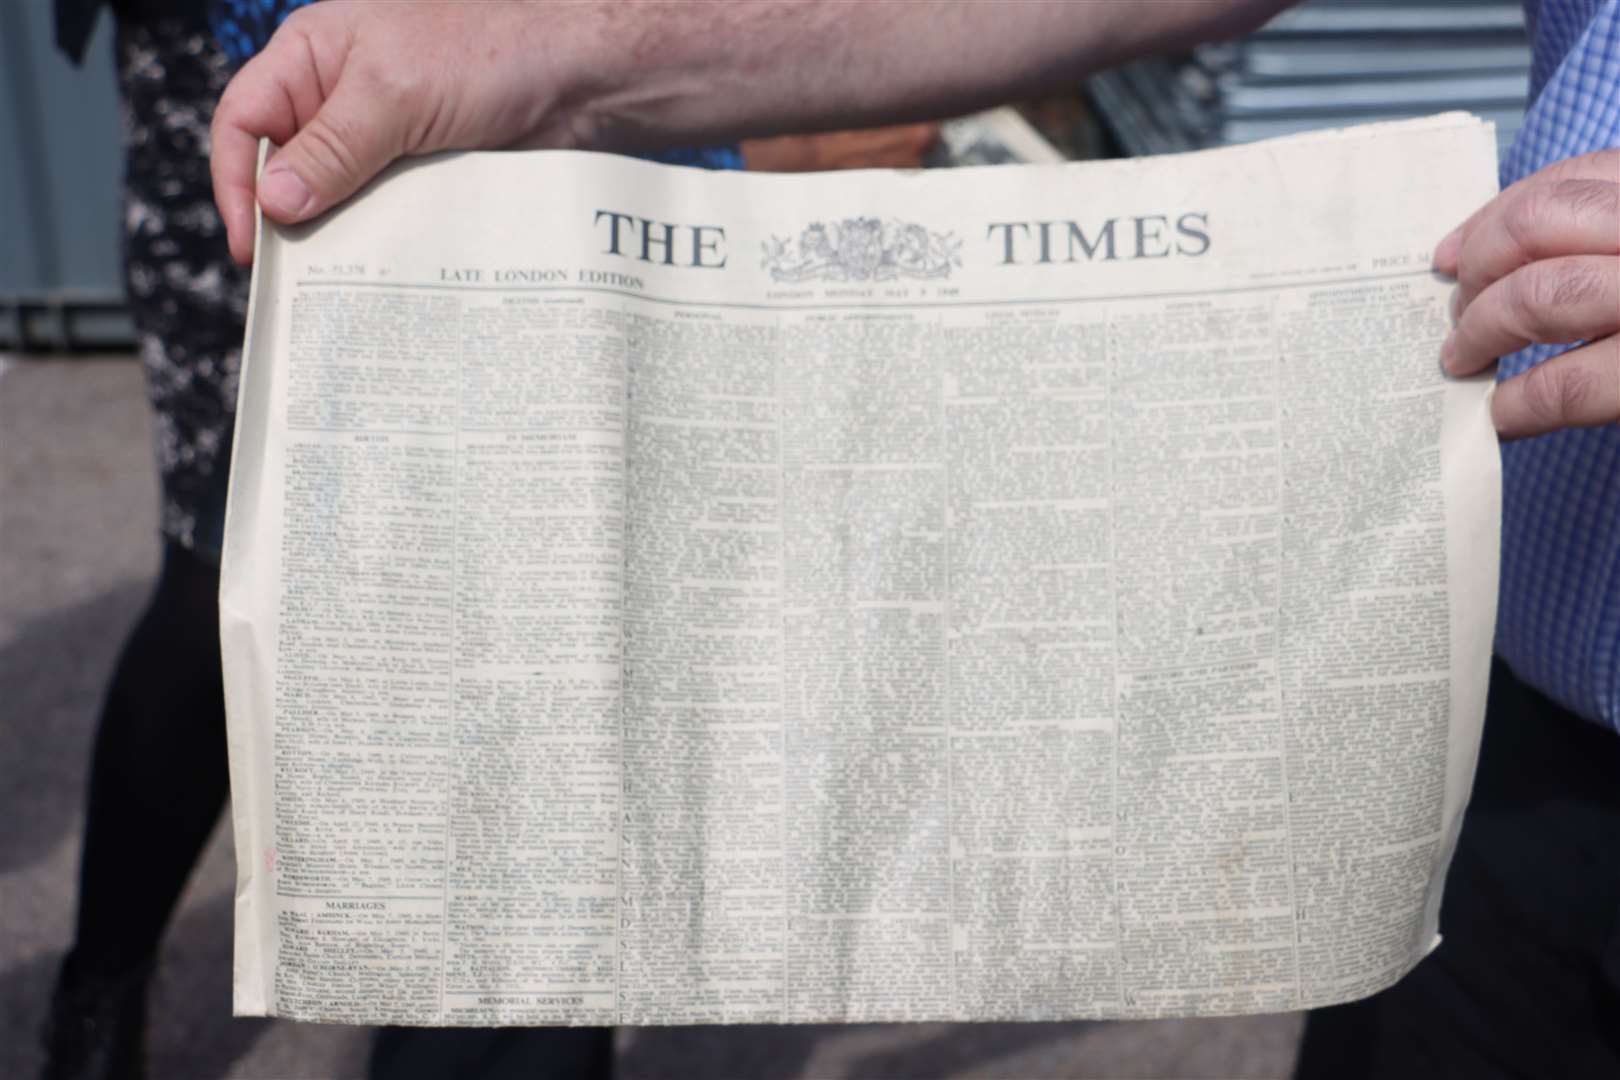 A copy-heavy edition of The Times was also found (University of Portsmouth/PA)